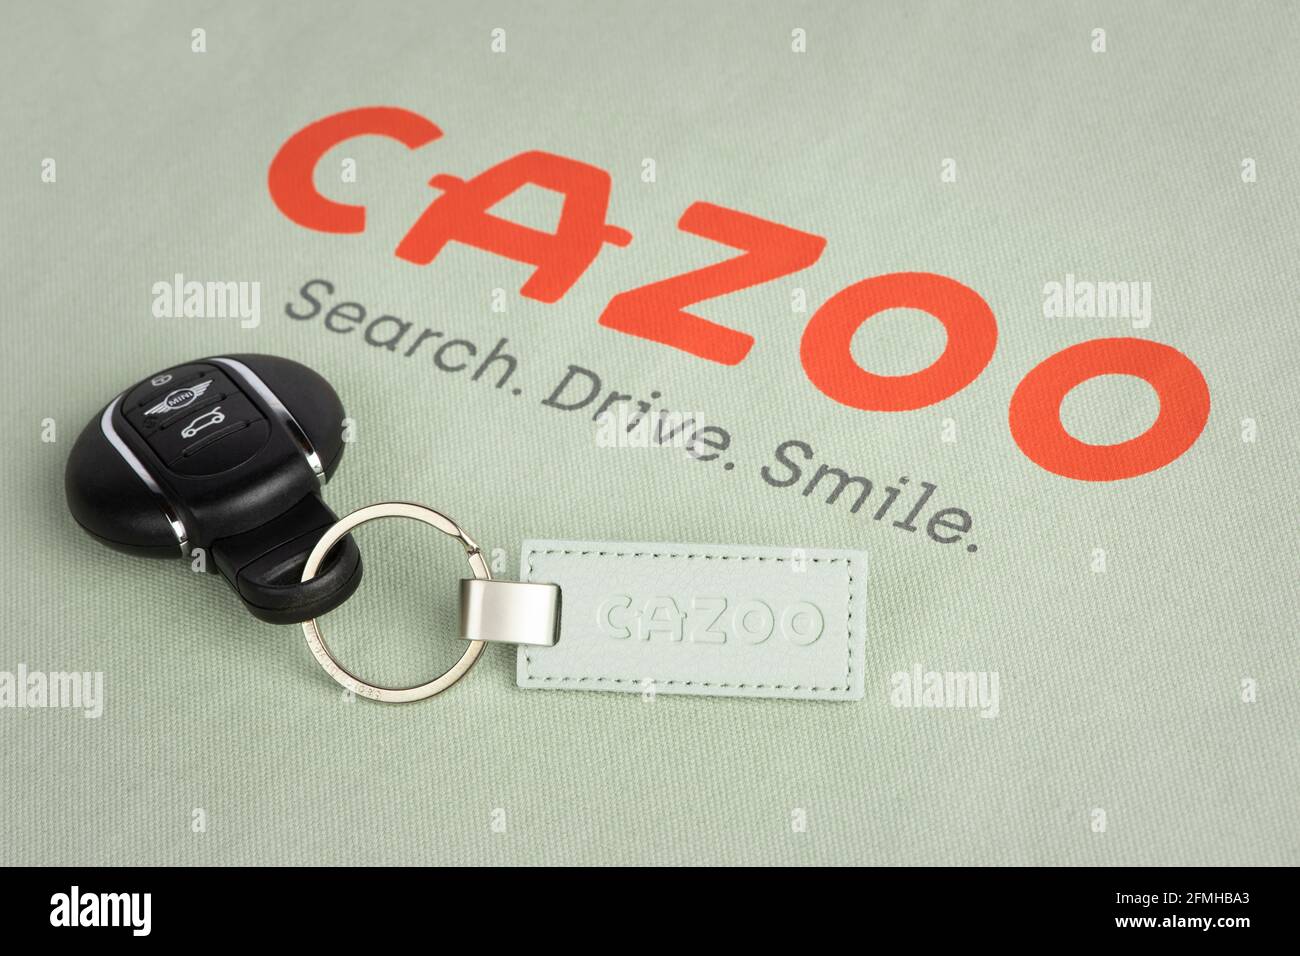 The logo of online automotive retailer Cazoo as seen on one of the company's tote bags and keyring. Stock Photo